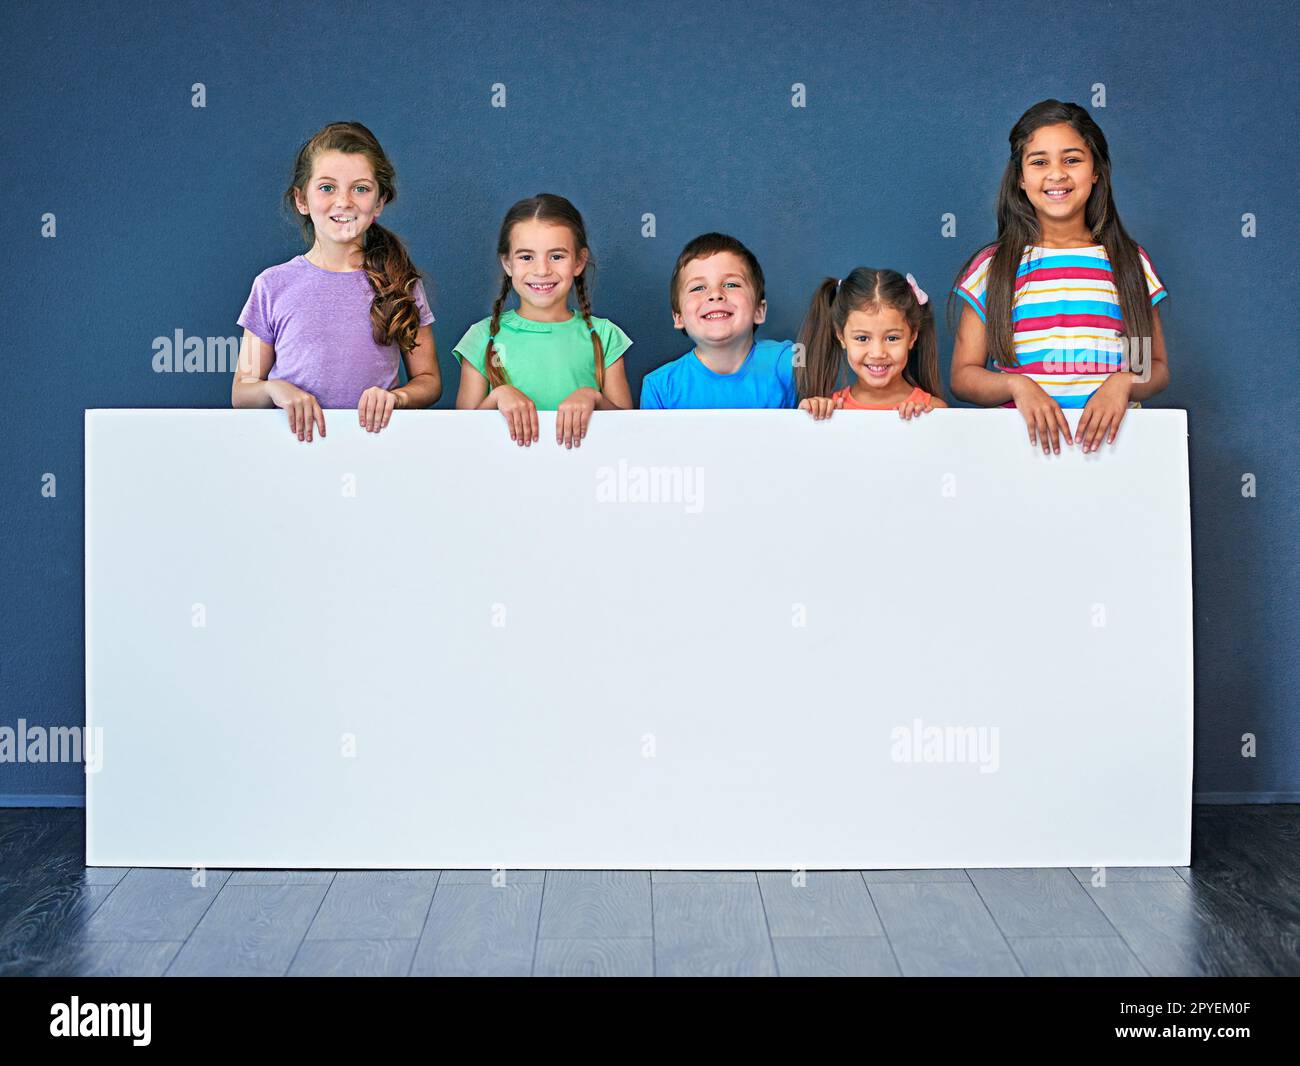 Endorsed by kids for kids. Studio shot of a diverse group of kids standing behind a large blank banner against a blue background. Stock Photo